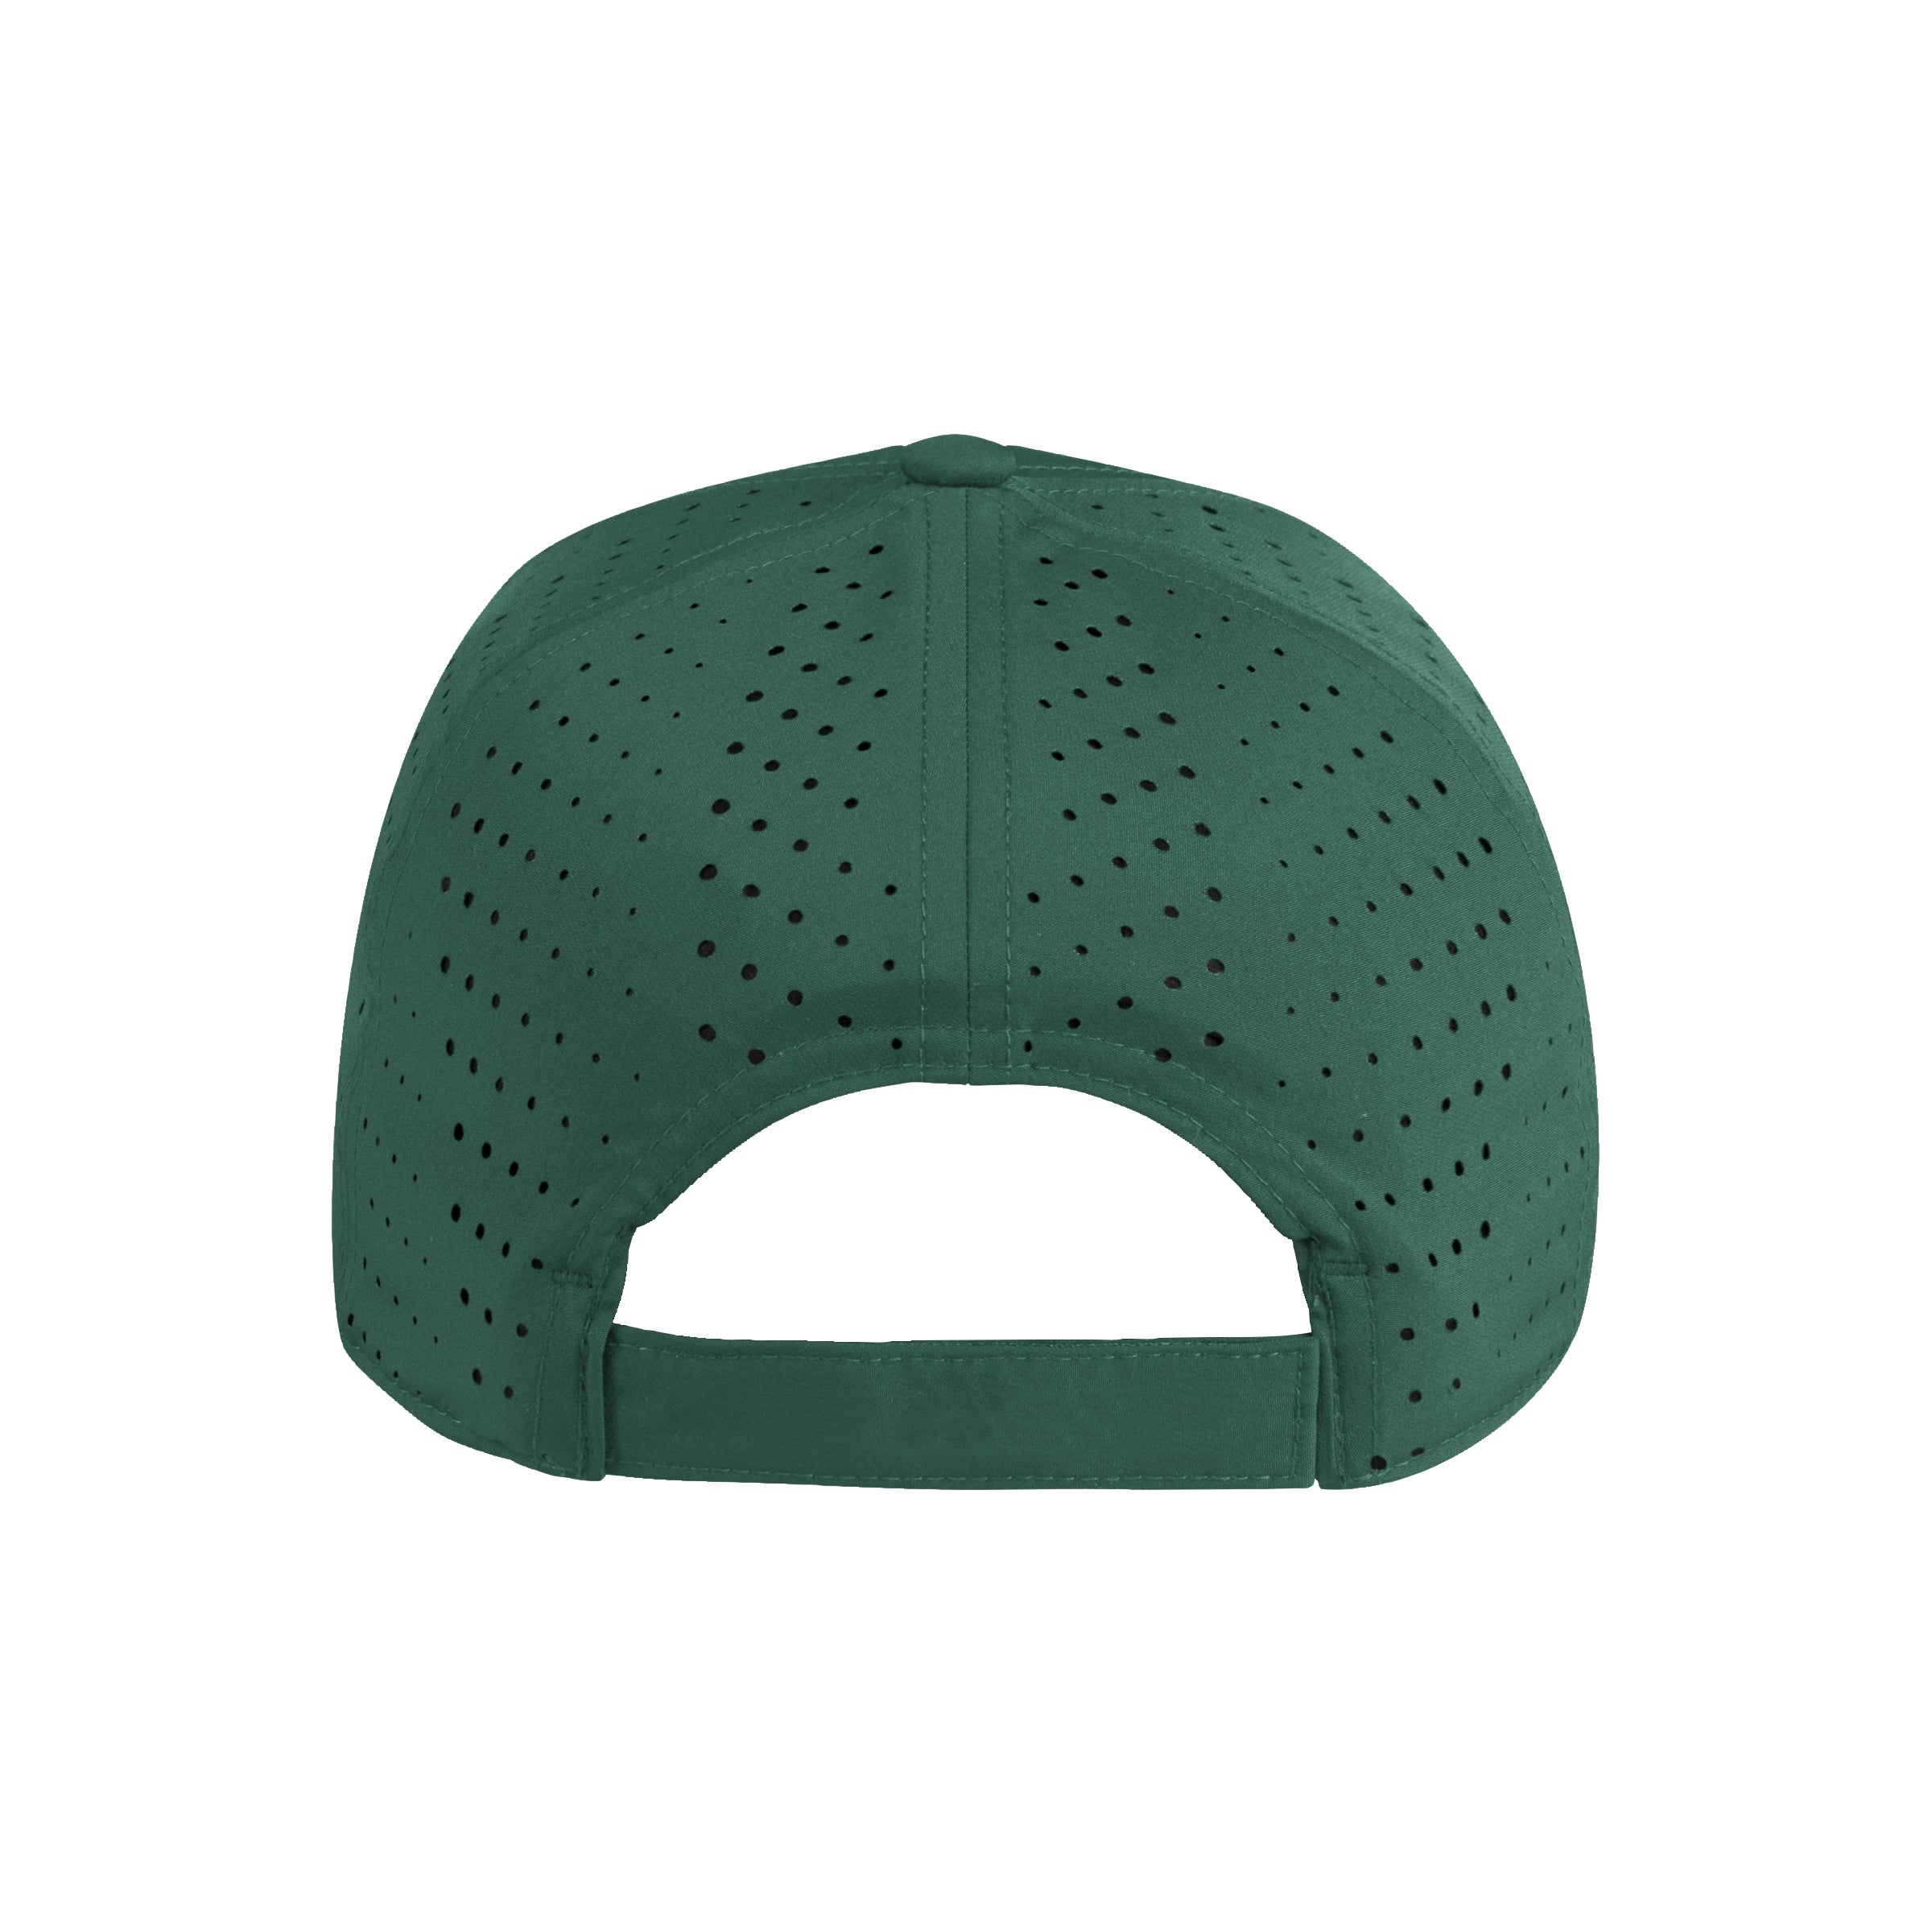 Miami Hurricanes 2023 adidas Structured Flat Brim Perforated Adjustable Hat - Green